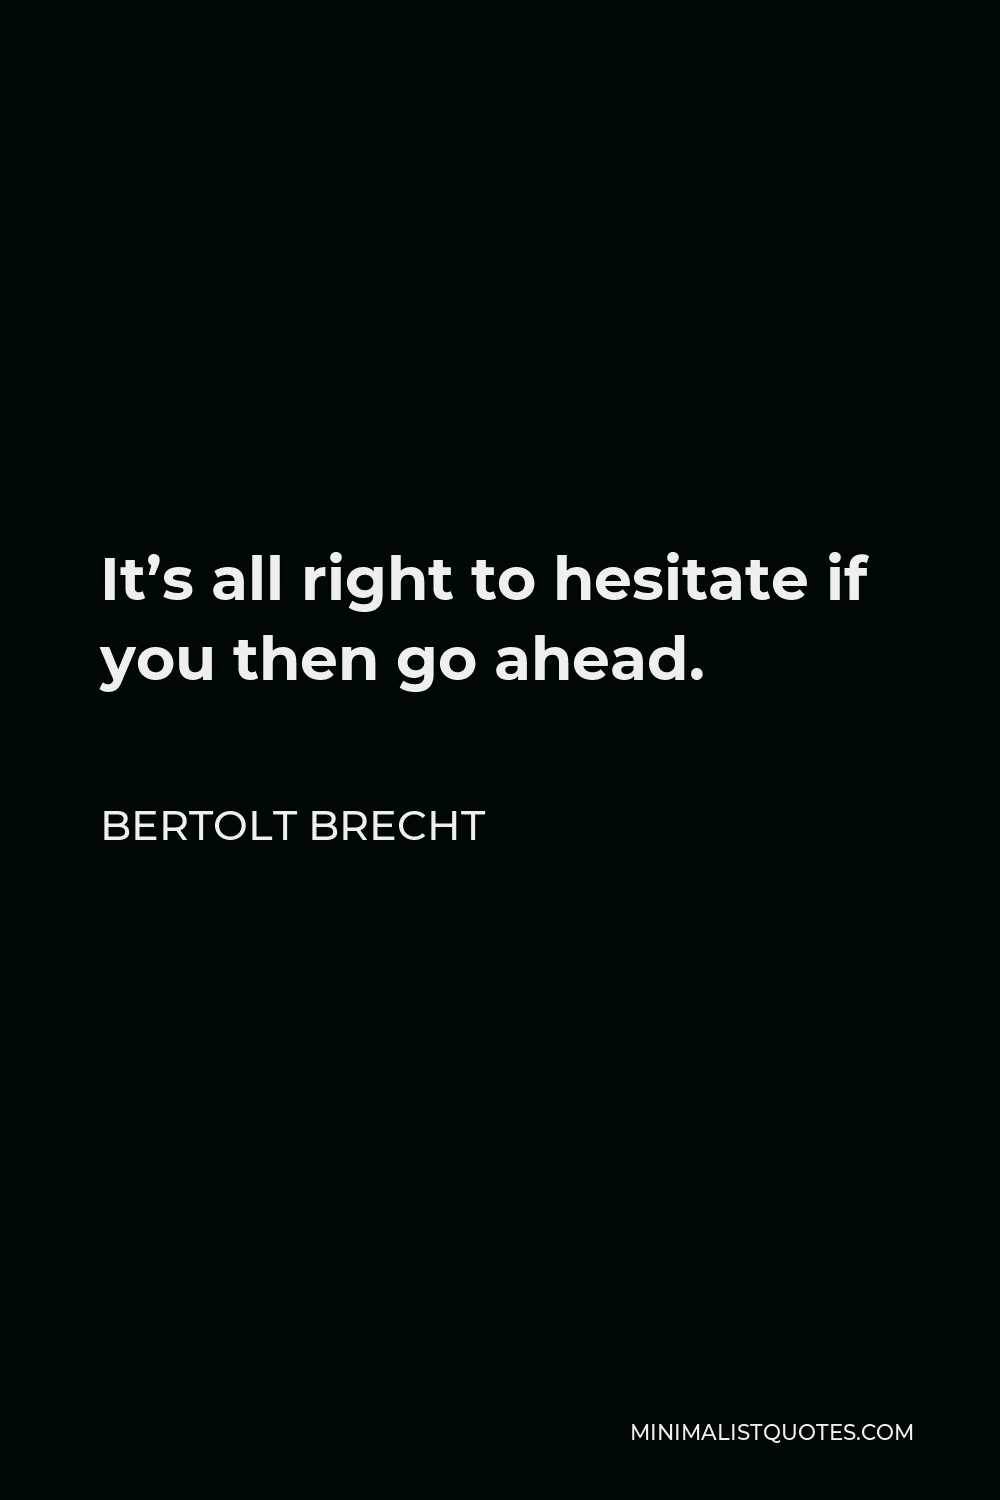 Bertolt Brecht Quote - It’s all right to hesitate if you then go ahead.